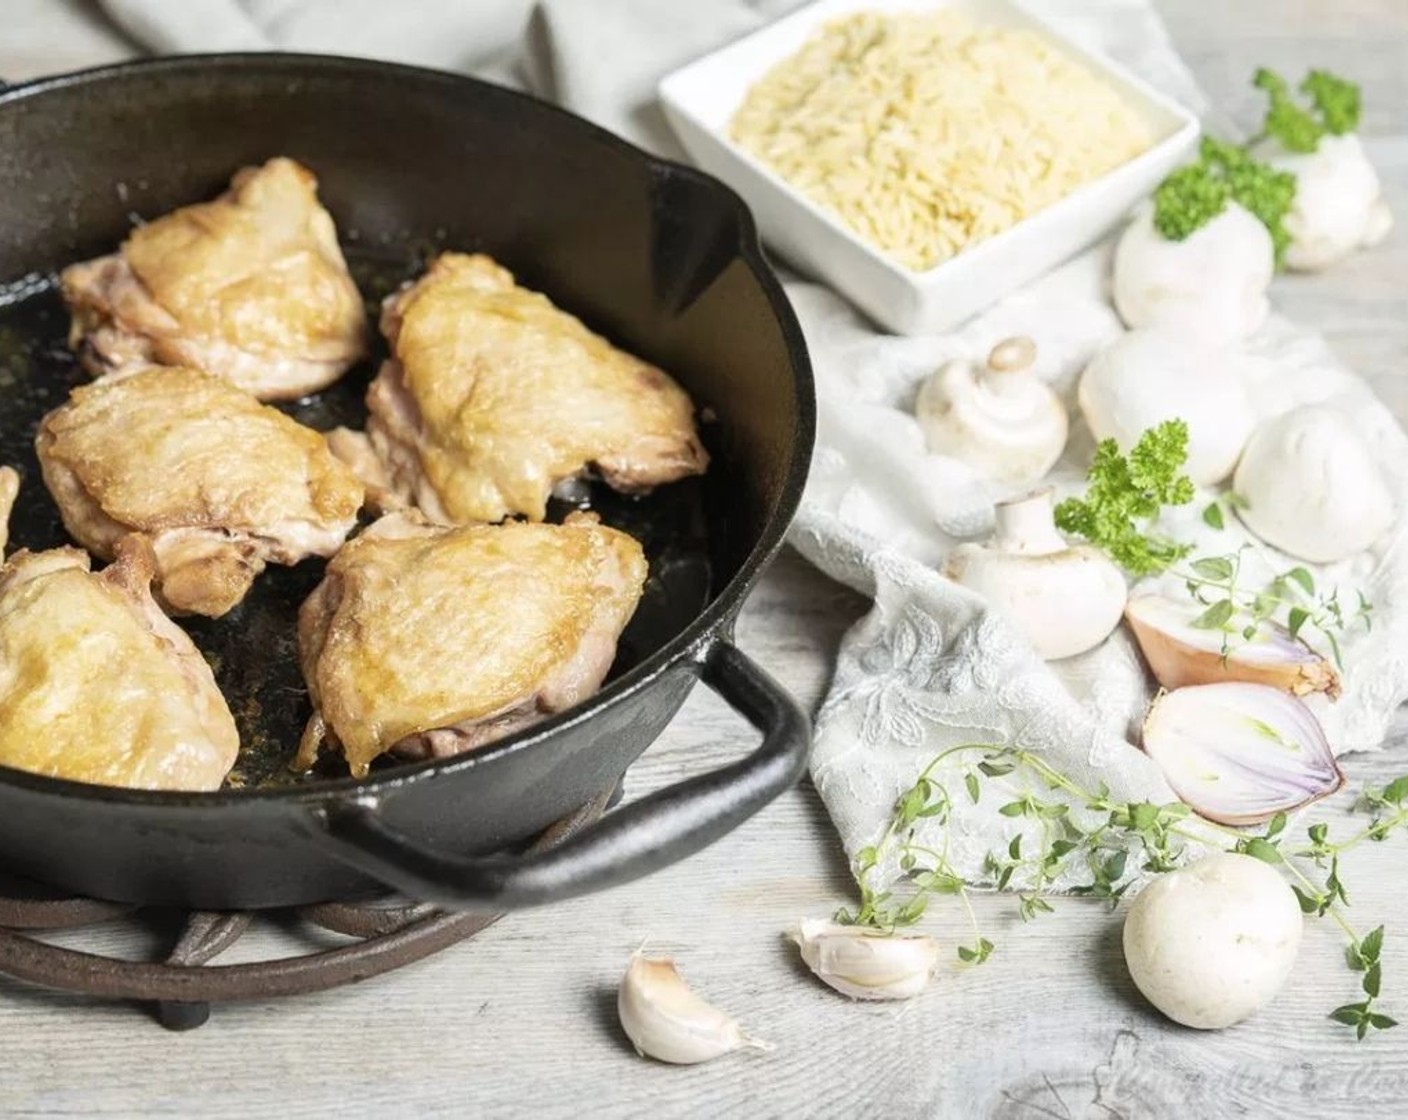 step 2 Heat Canola Oil (1/2 Tbsp) in a cast iron or oven-safe skillet over medium-high heat. Pat Chicken Thighs (6) dry with a paper towel. When the oil is hot, add chicken thighs and cook about 5-6 minutes on each side until skin is browned. Remove to a plate.